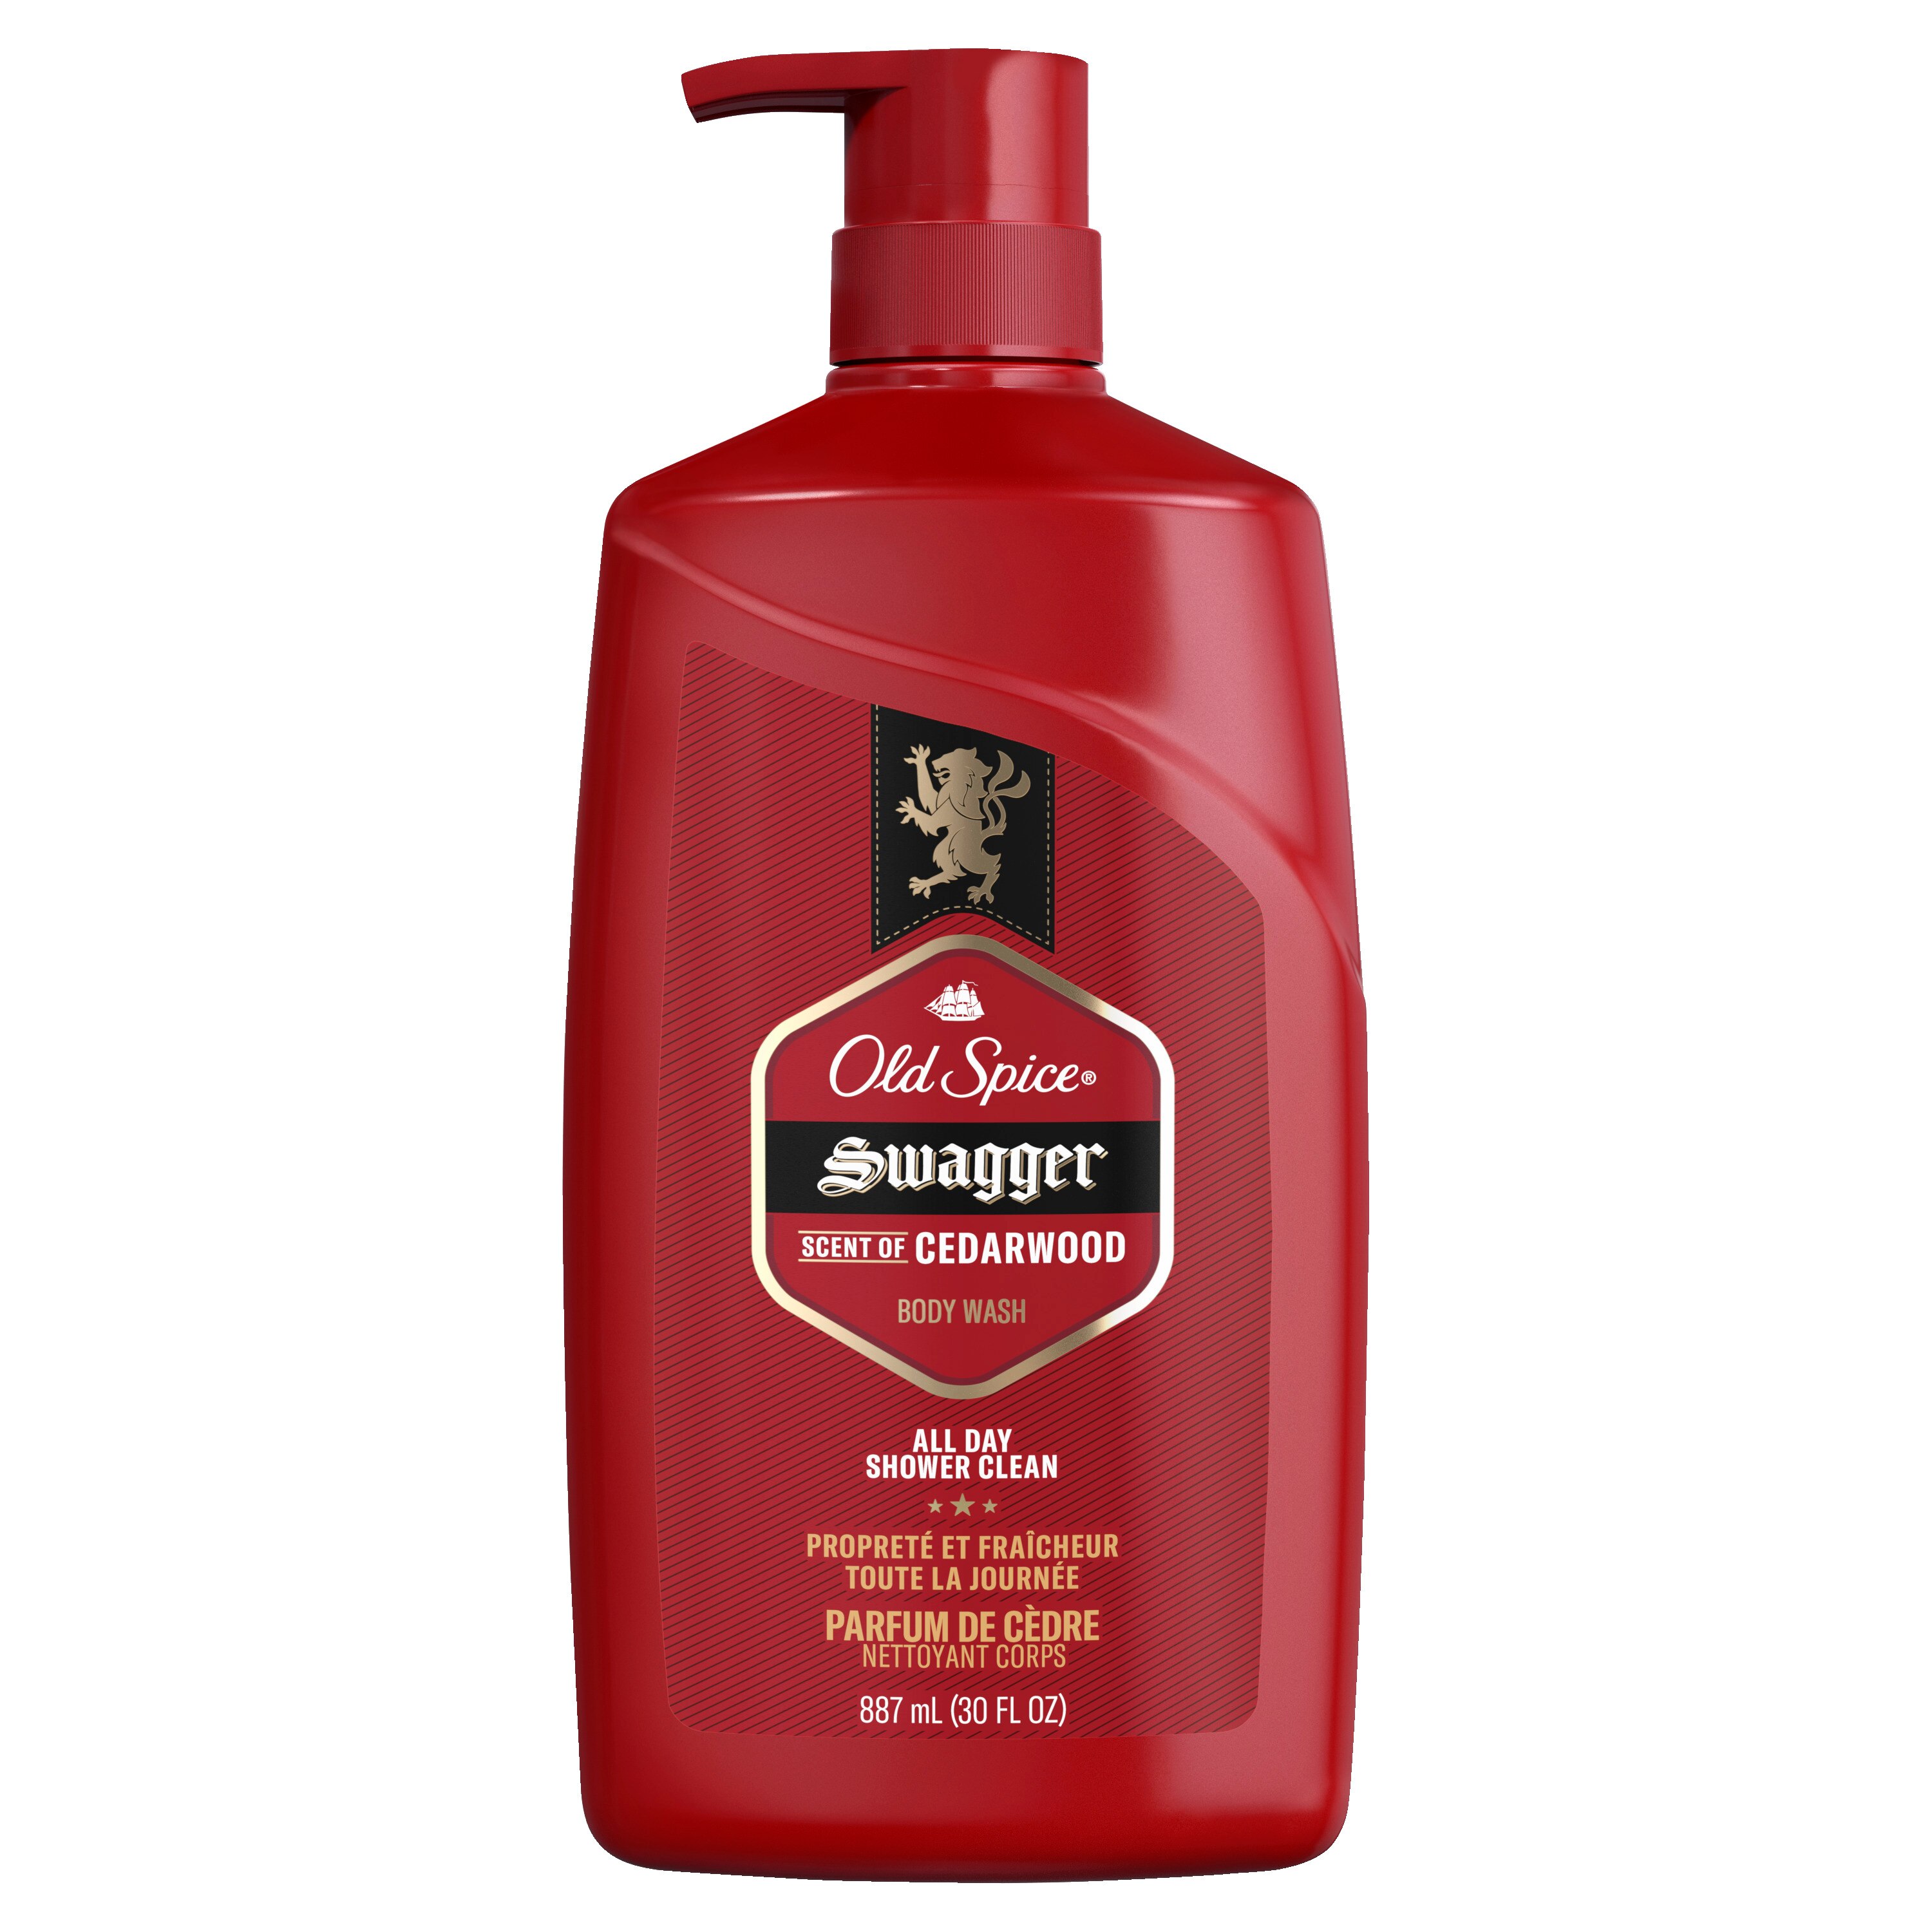  Old Spice Red Zone Men's Body Wash, Swagger Scent 